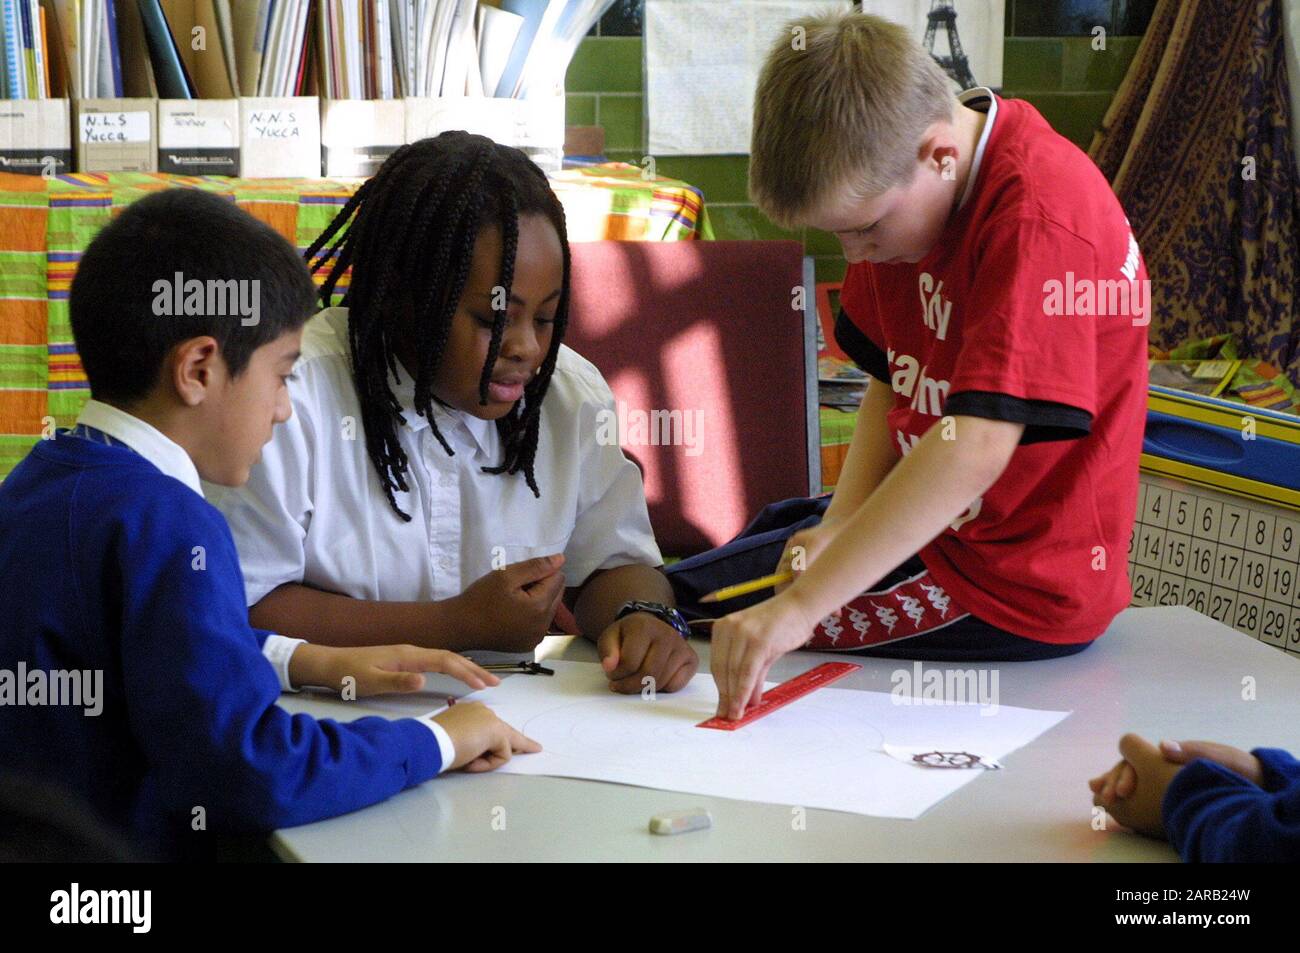 Primary students working together on a math problem using measurements Stock Photo